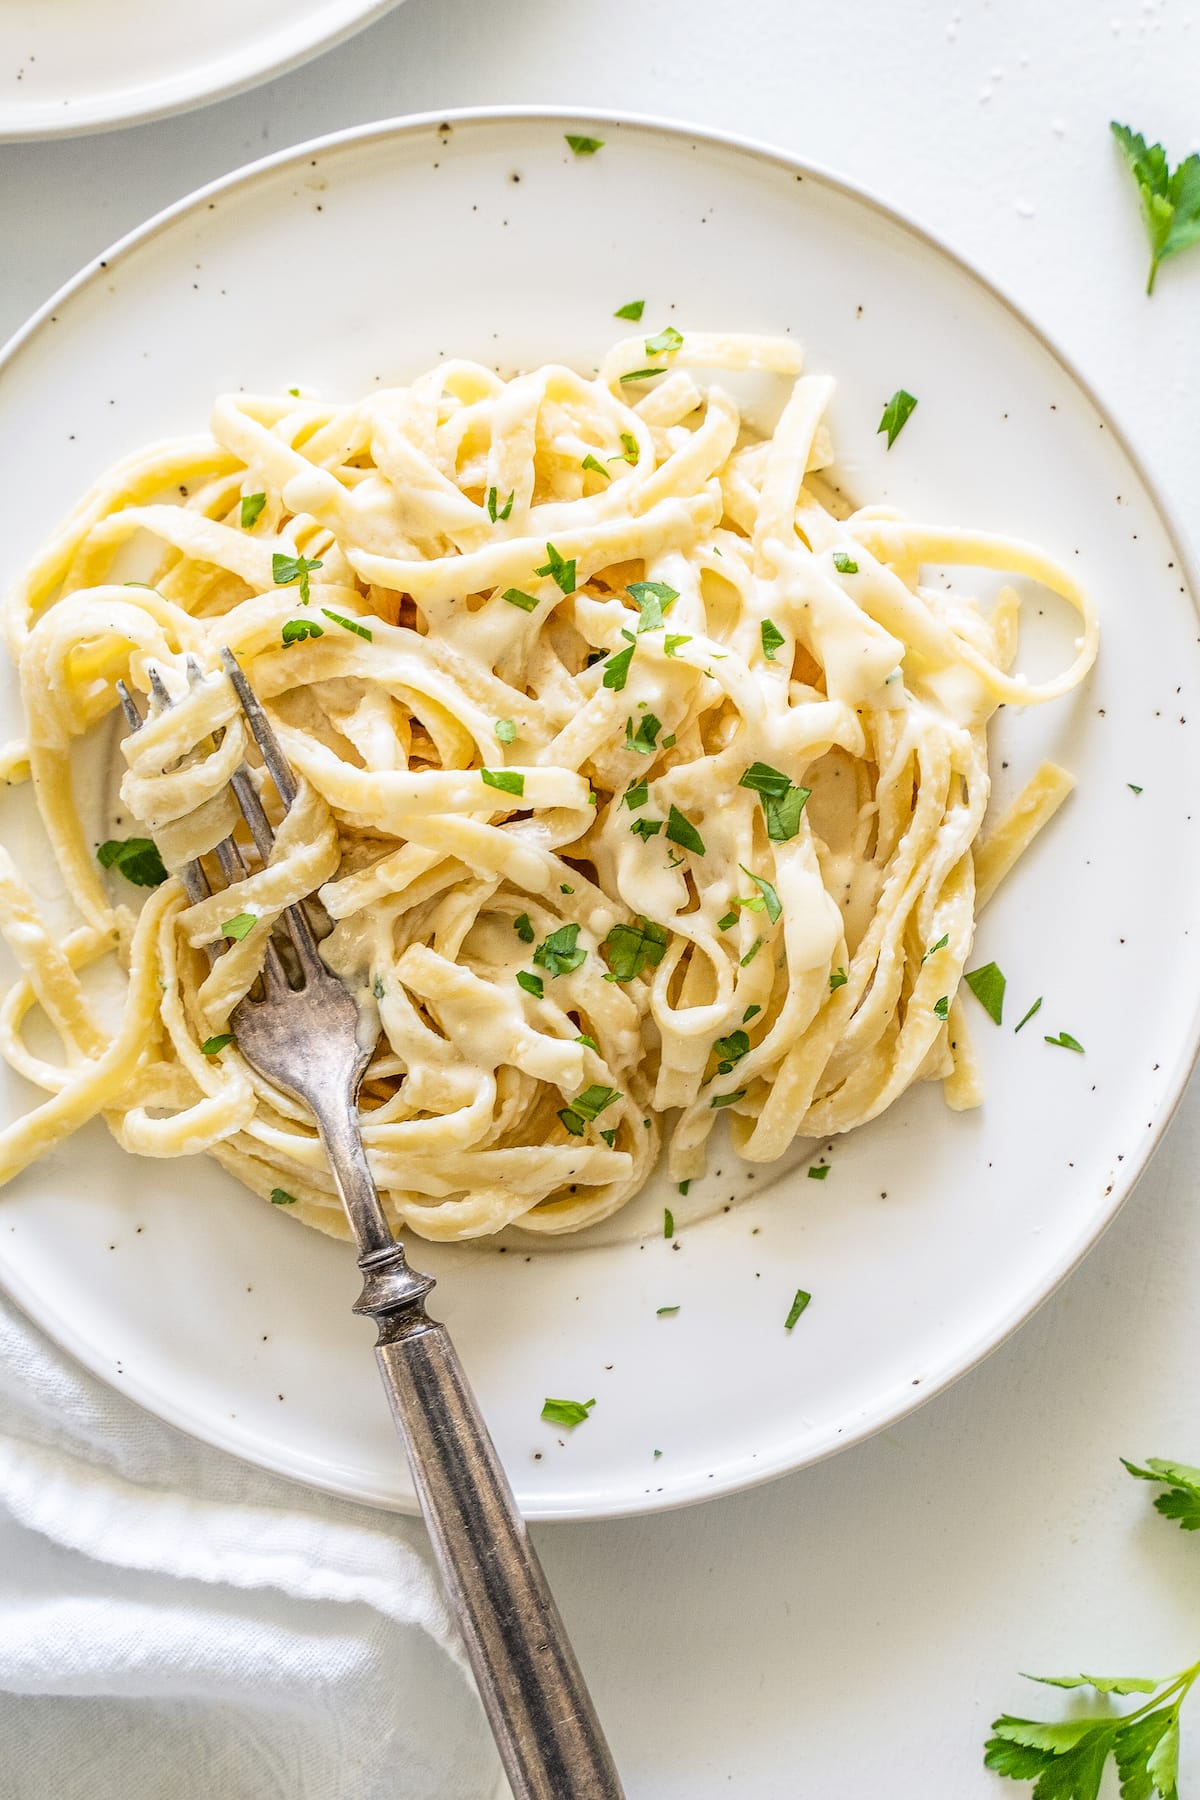 A plate with pasta and alfredo sauce garnished with fresh herbs